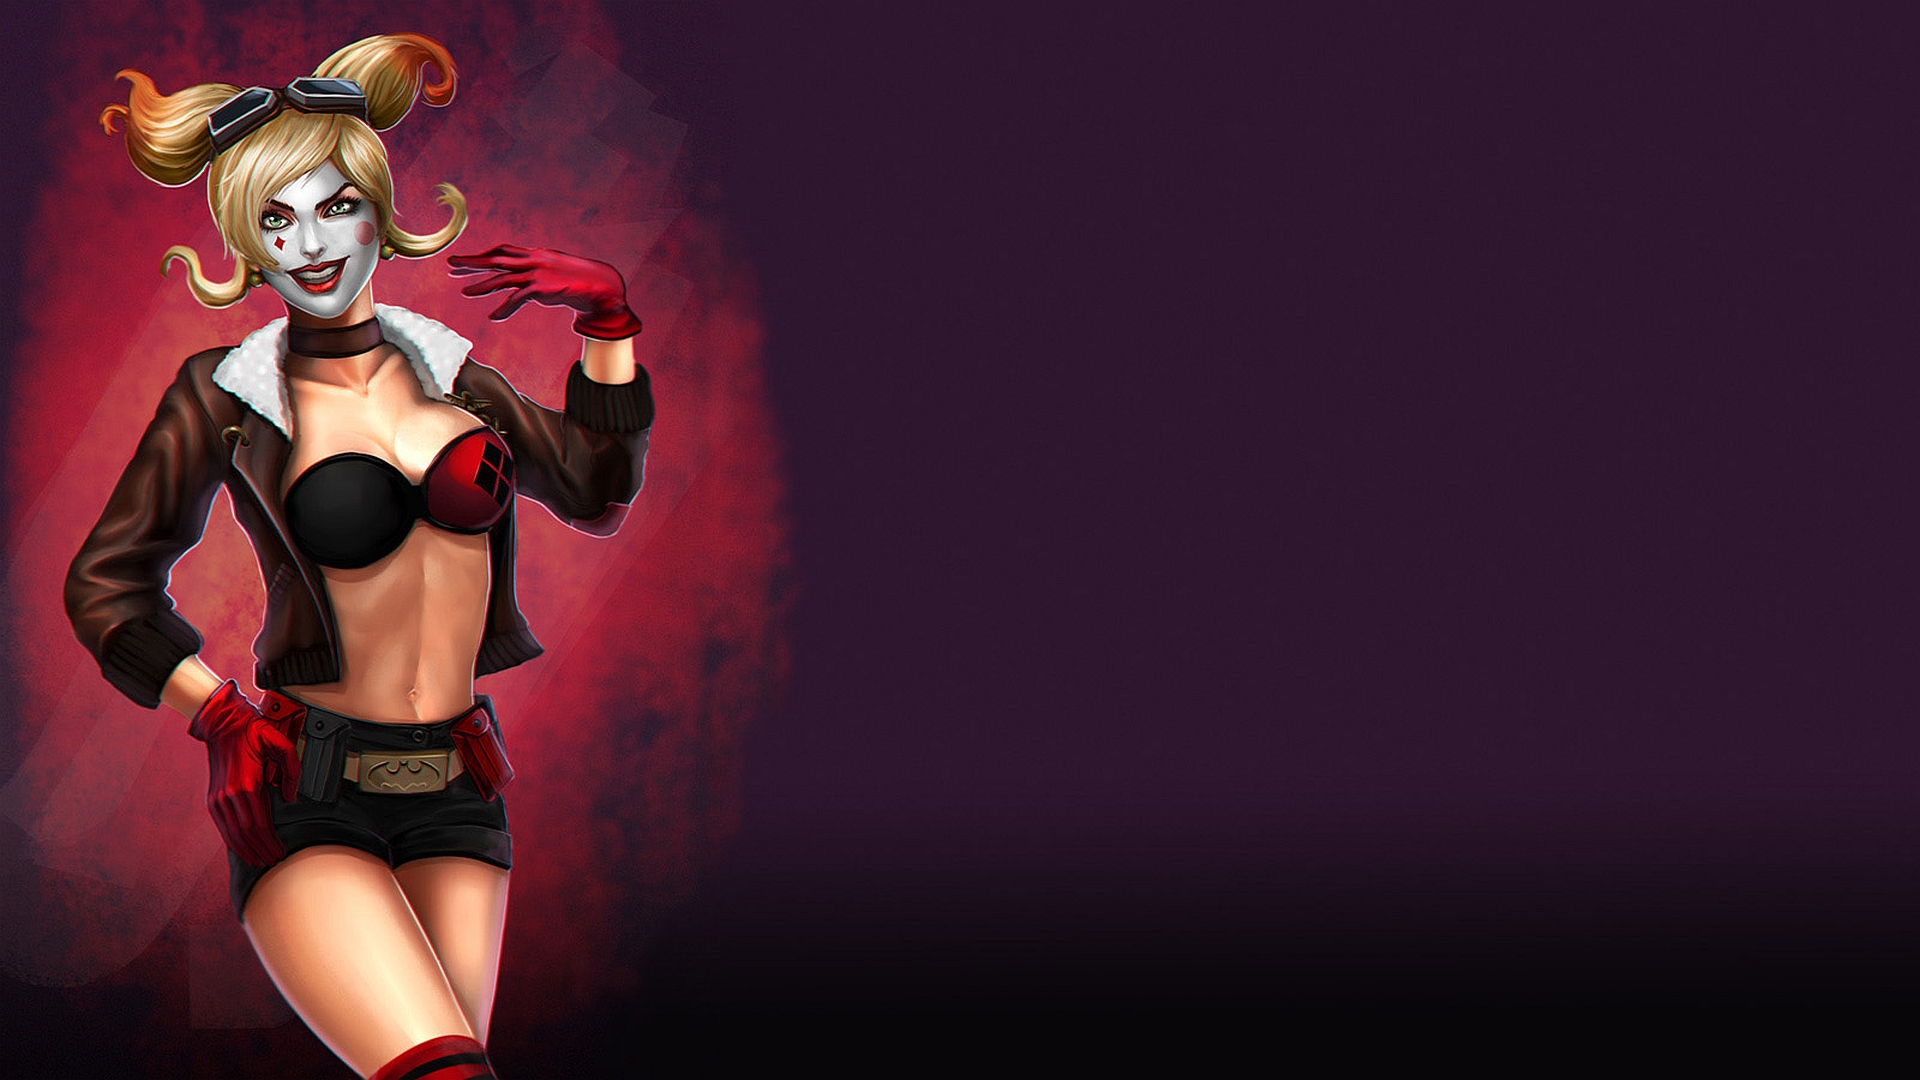 wallpapers of harley quinn,harley quinn,fictional character,muscle,cg artwork,style